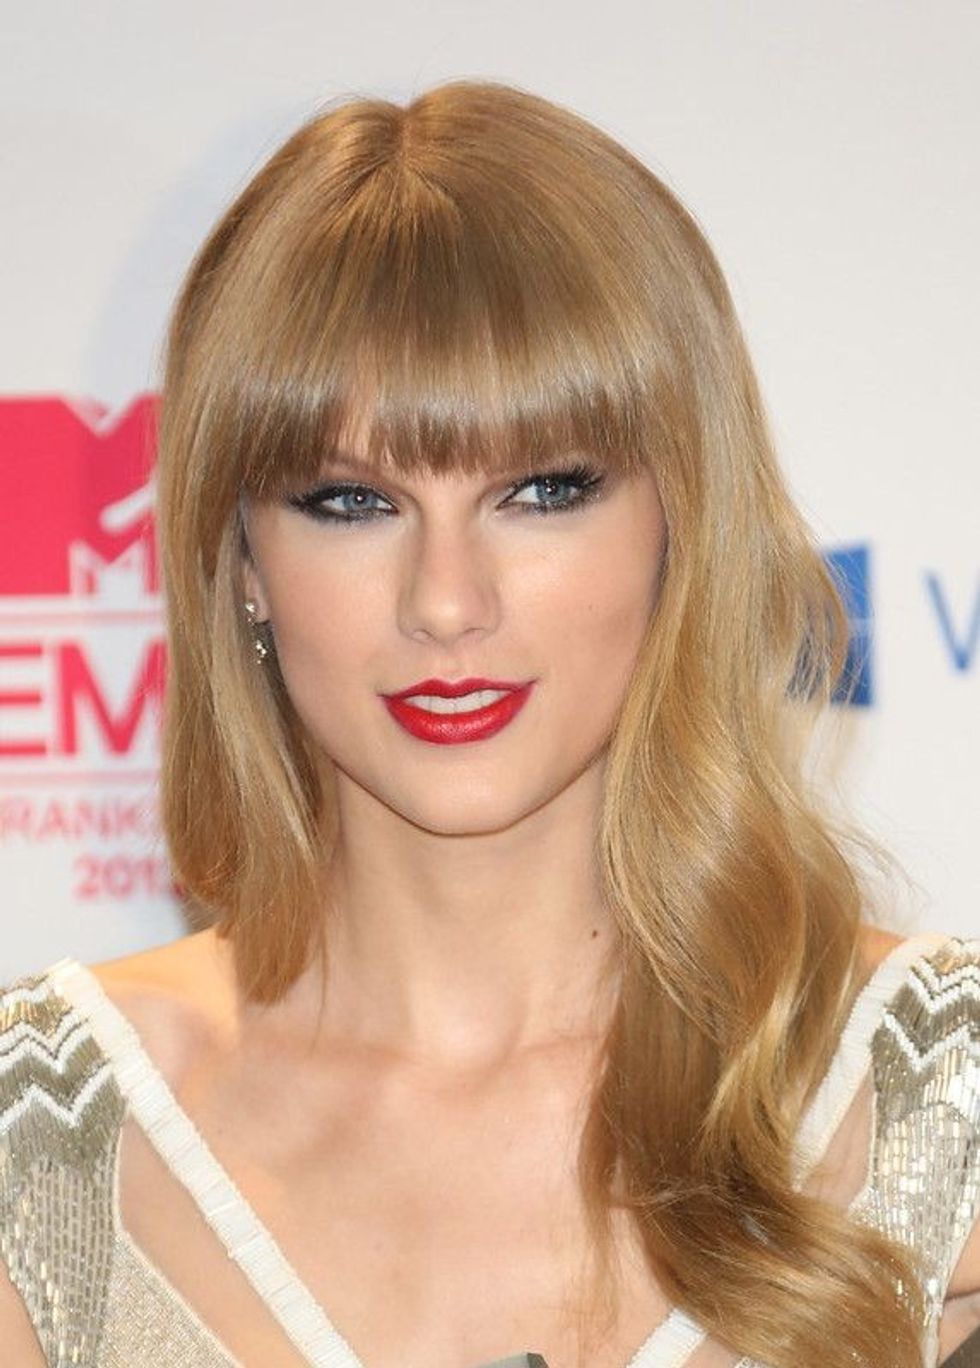 Image of Taylor Swift from an event